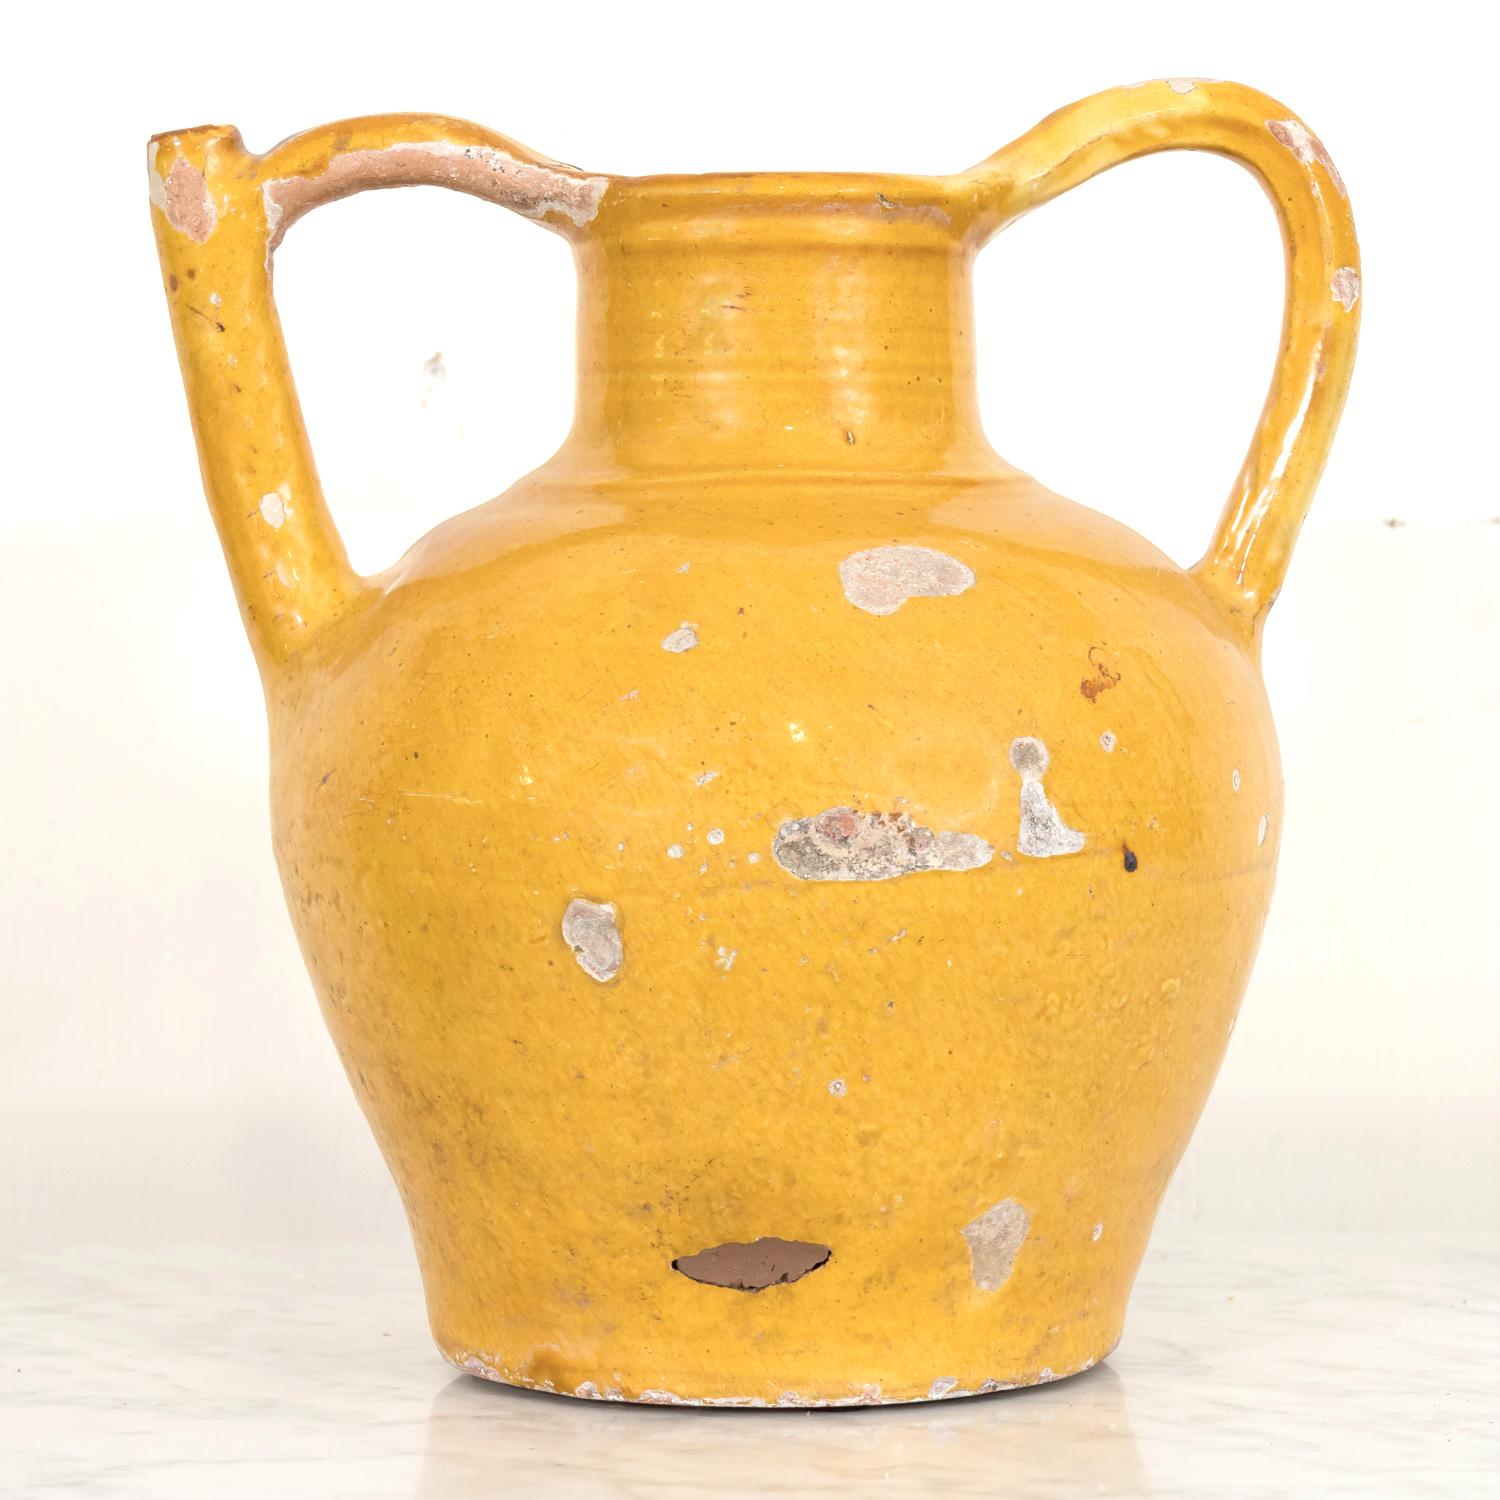 A 19th century French water jug or cruche orjol from the Languedoc region in southwest France, having a mustard yellow glaze and two beautifully arched handles that rise above the opening with the spout formed into the handle on one side, circa